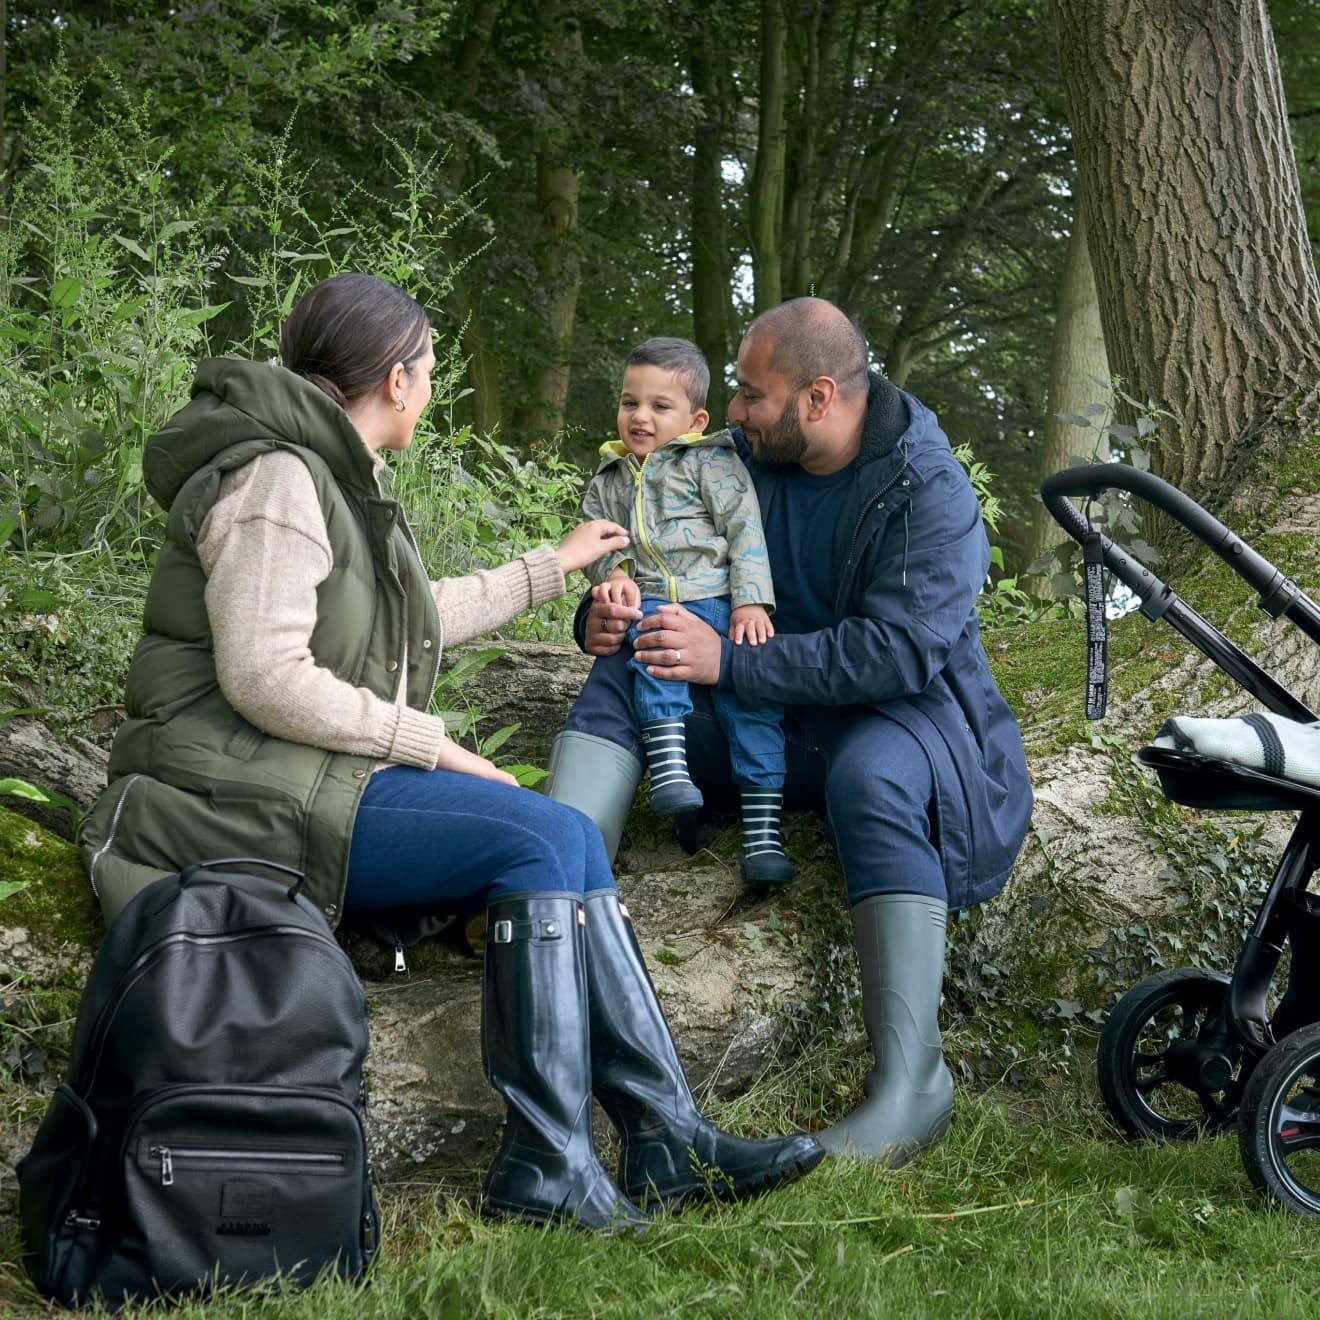 Pushchair Accessories: What Do You Need?